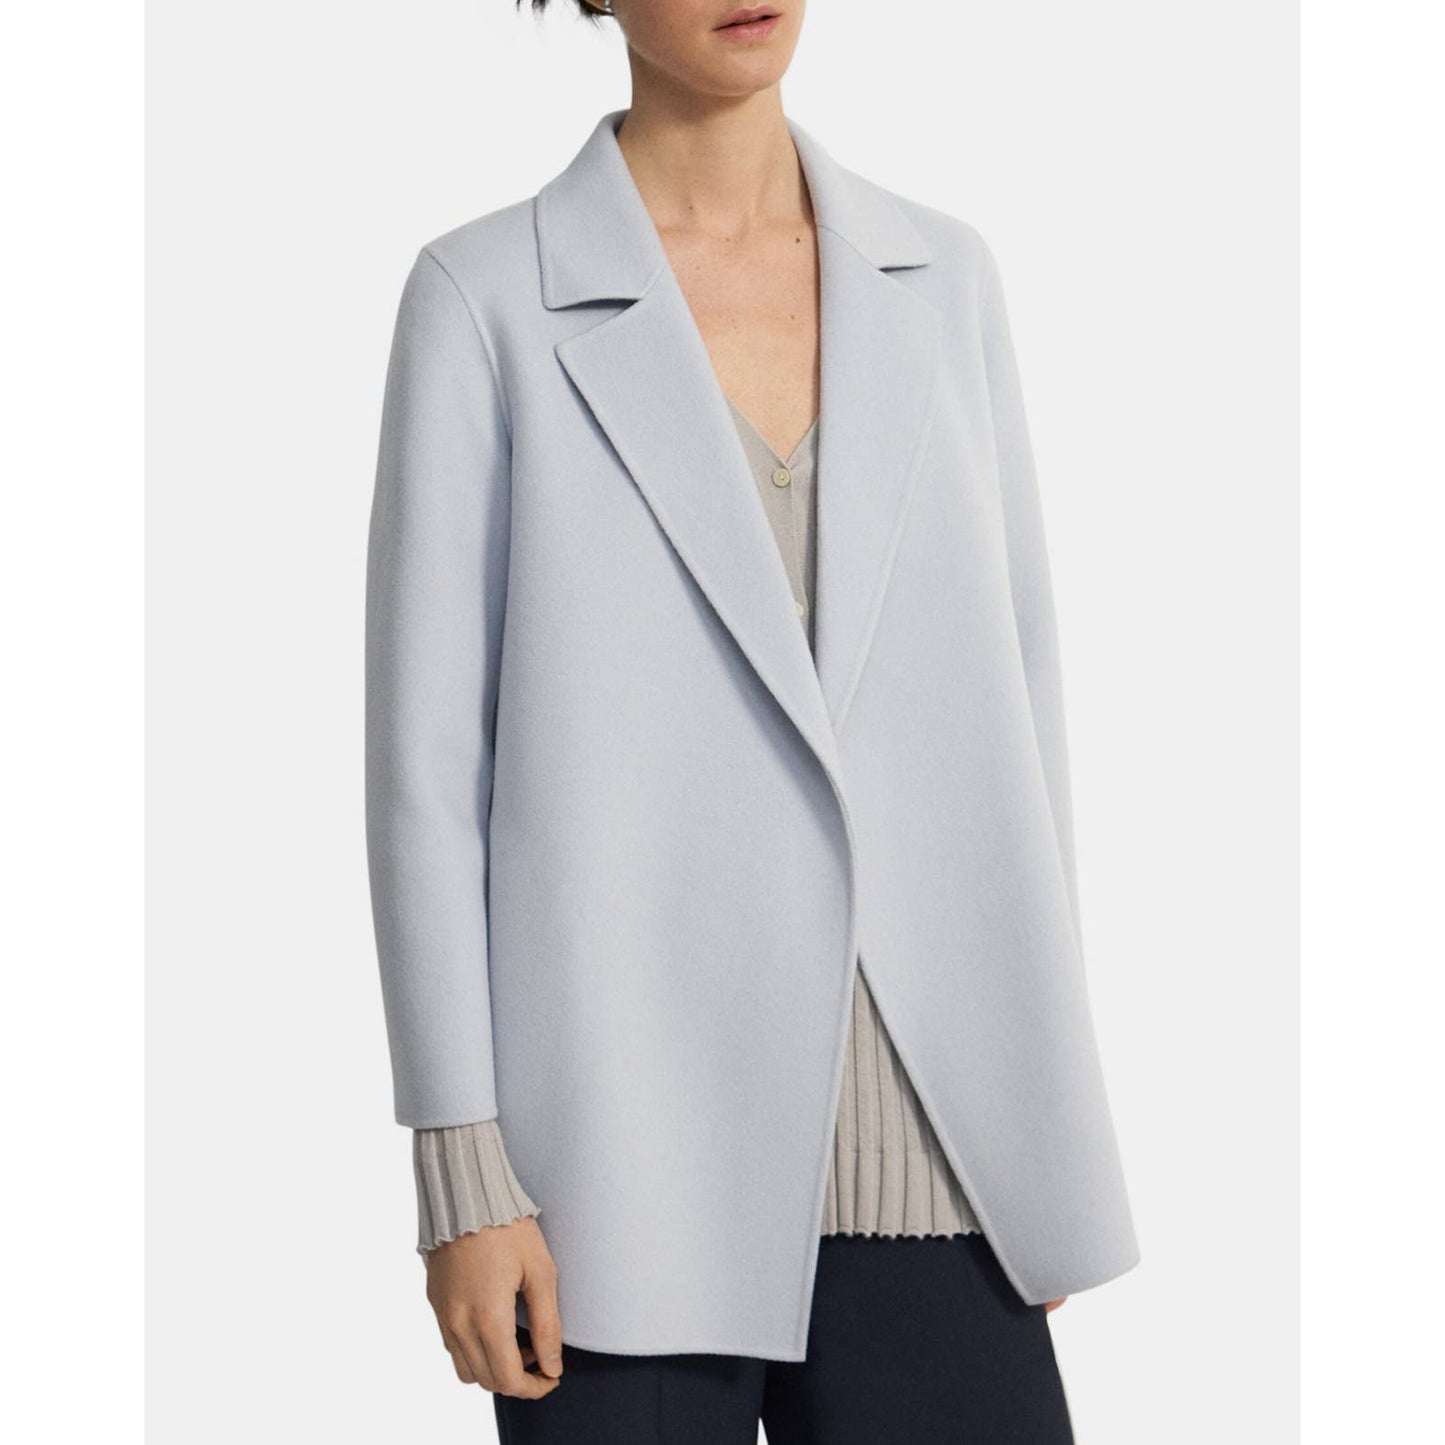 THEORY Clairene Jacket in Double-Face Wool-Cashmere in Harbor Melange, Medium